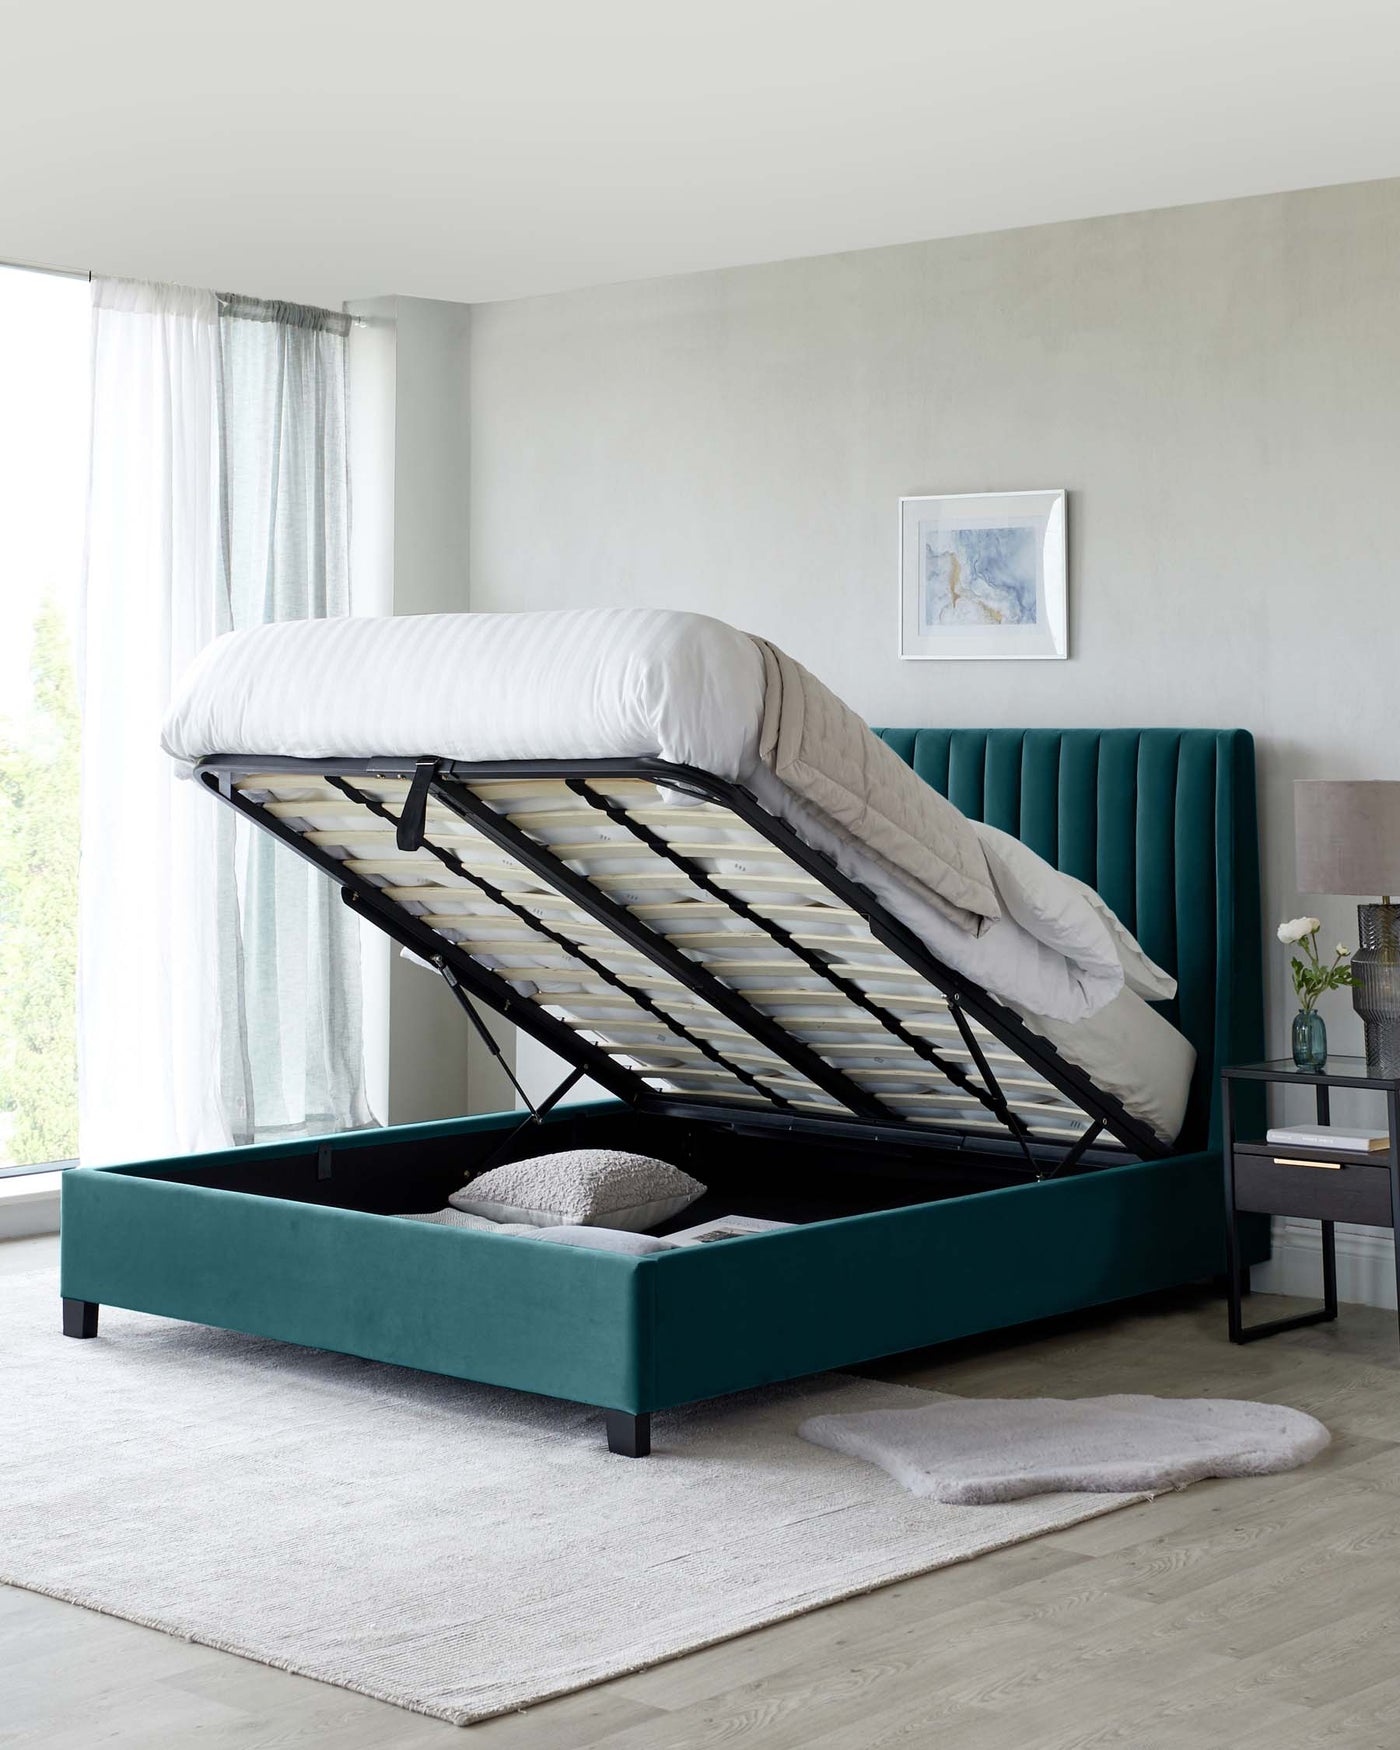 Elegant teal upholstered storage bed with a lifted mattress base revealing a spacious storage compartment. The bed features a vertical channel-tufted headboard and is complemented by a sleek black bedside table with a white tabletop and a drawer.